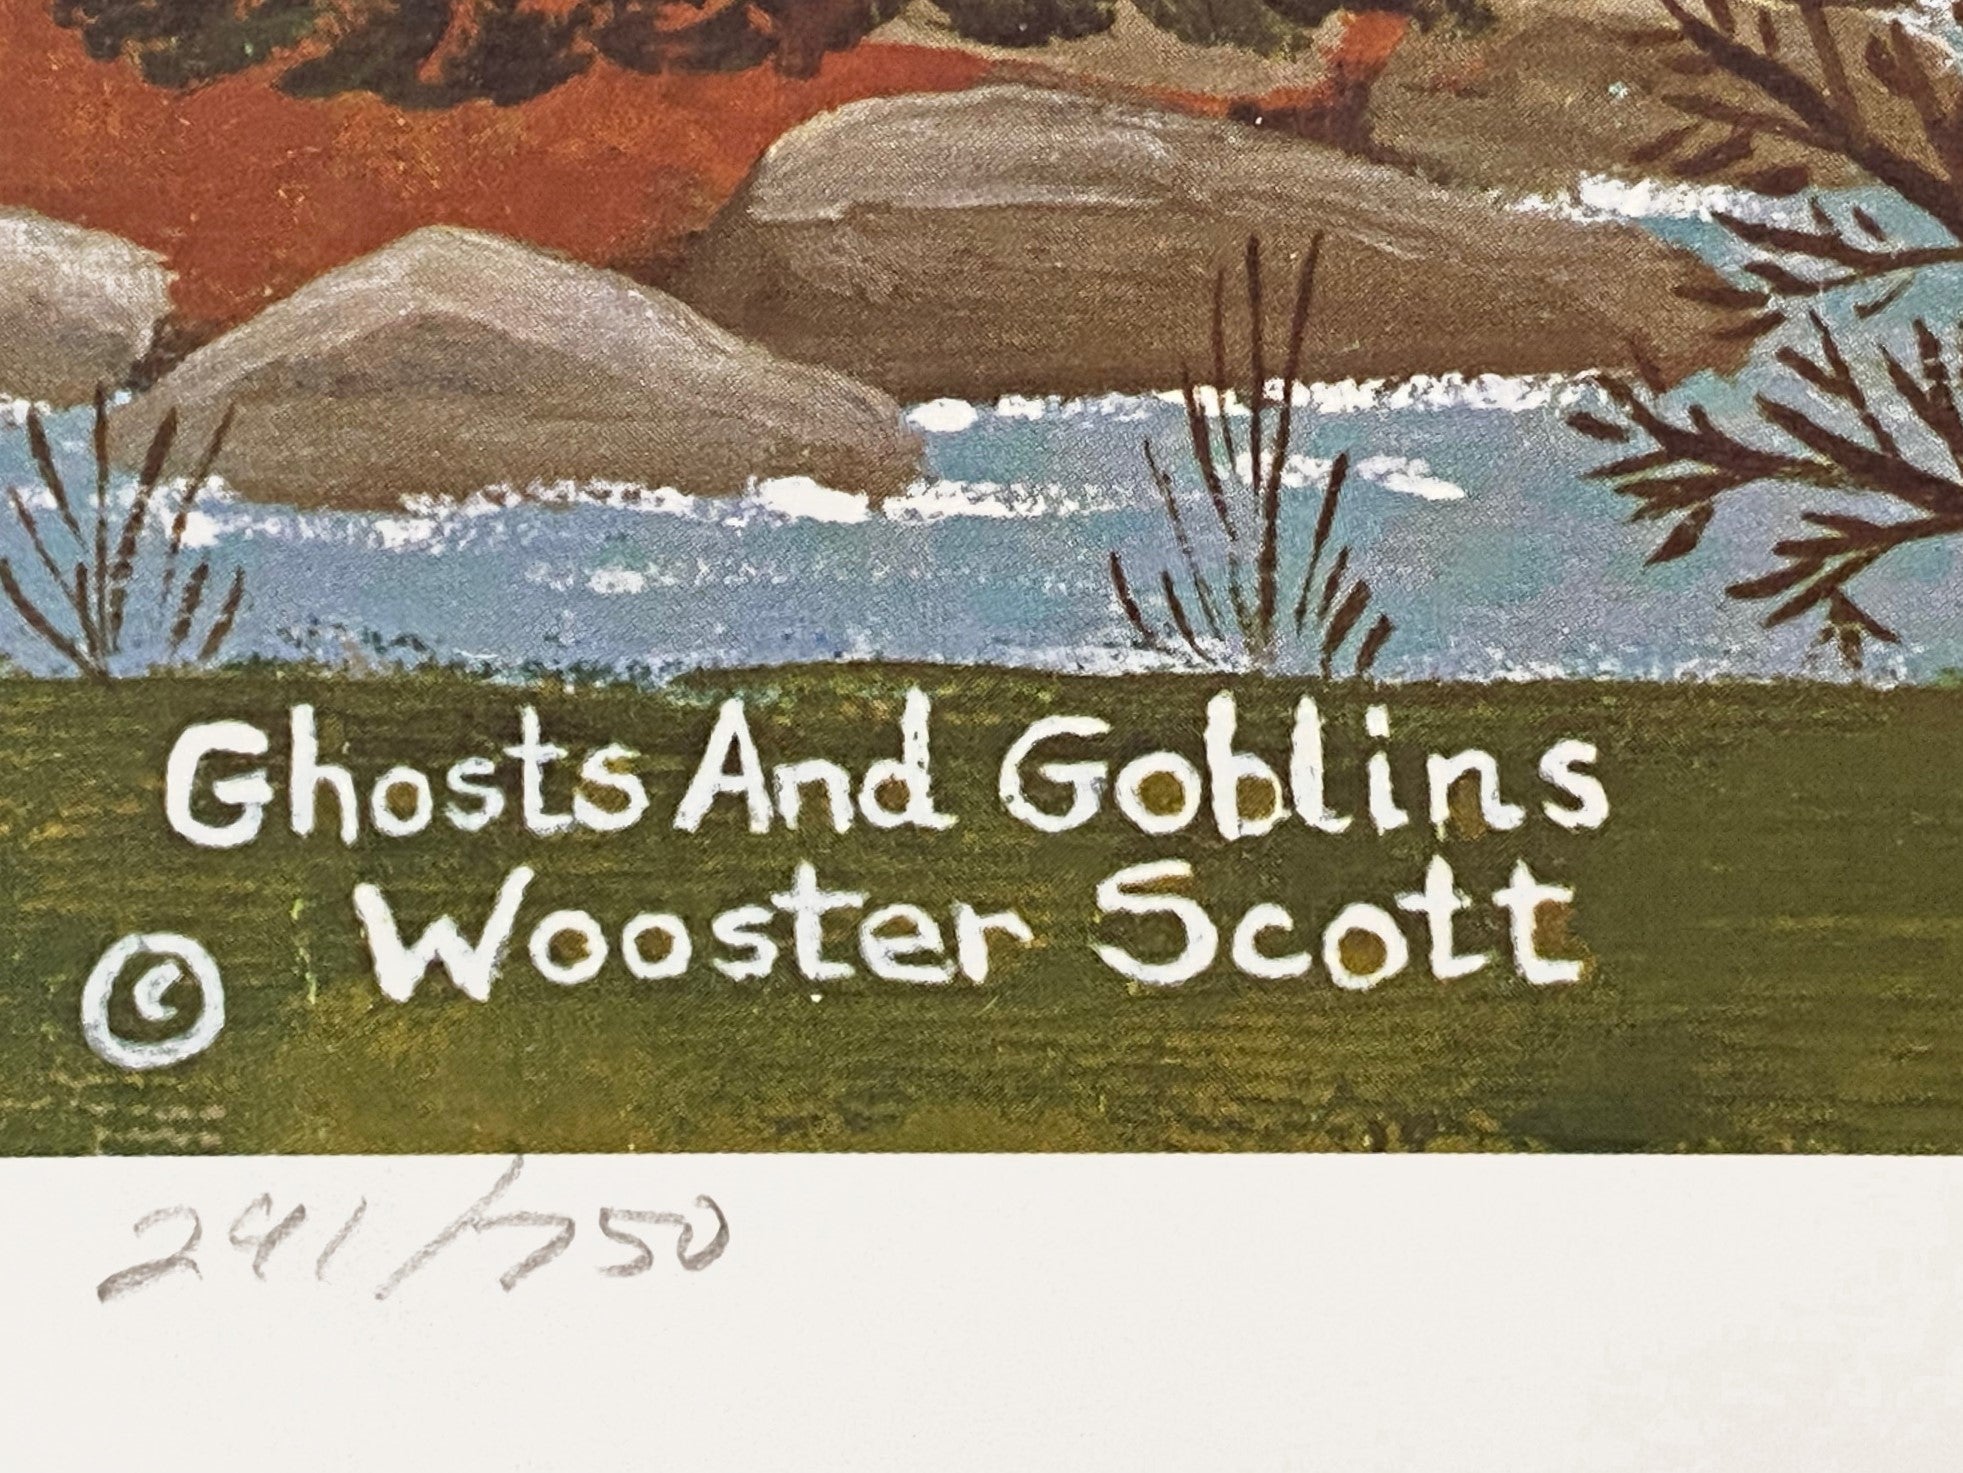 Ghosts and Goblins Jane Wooster Scott Lithograph Print Artist Hand Signed and Numbered